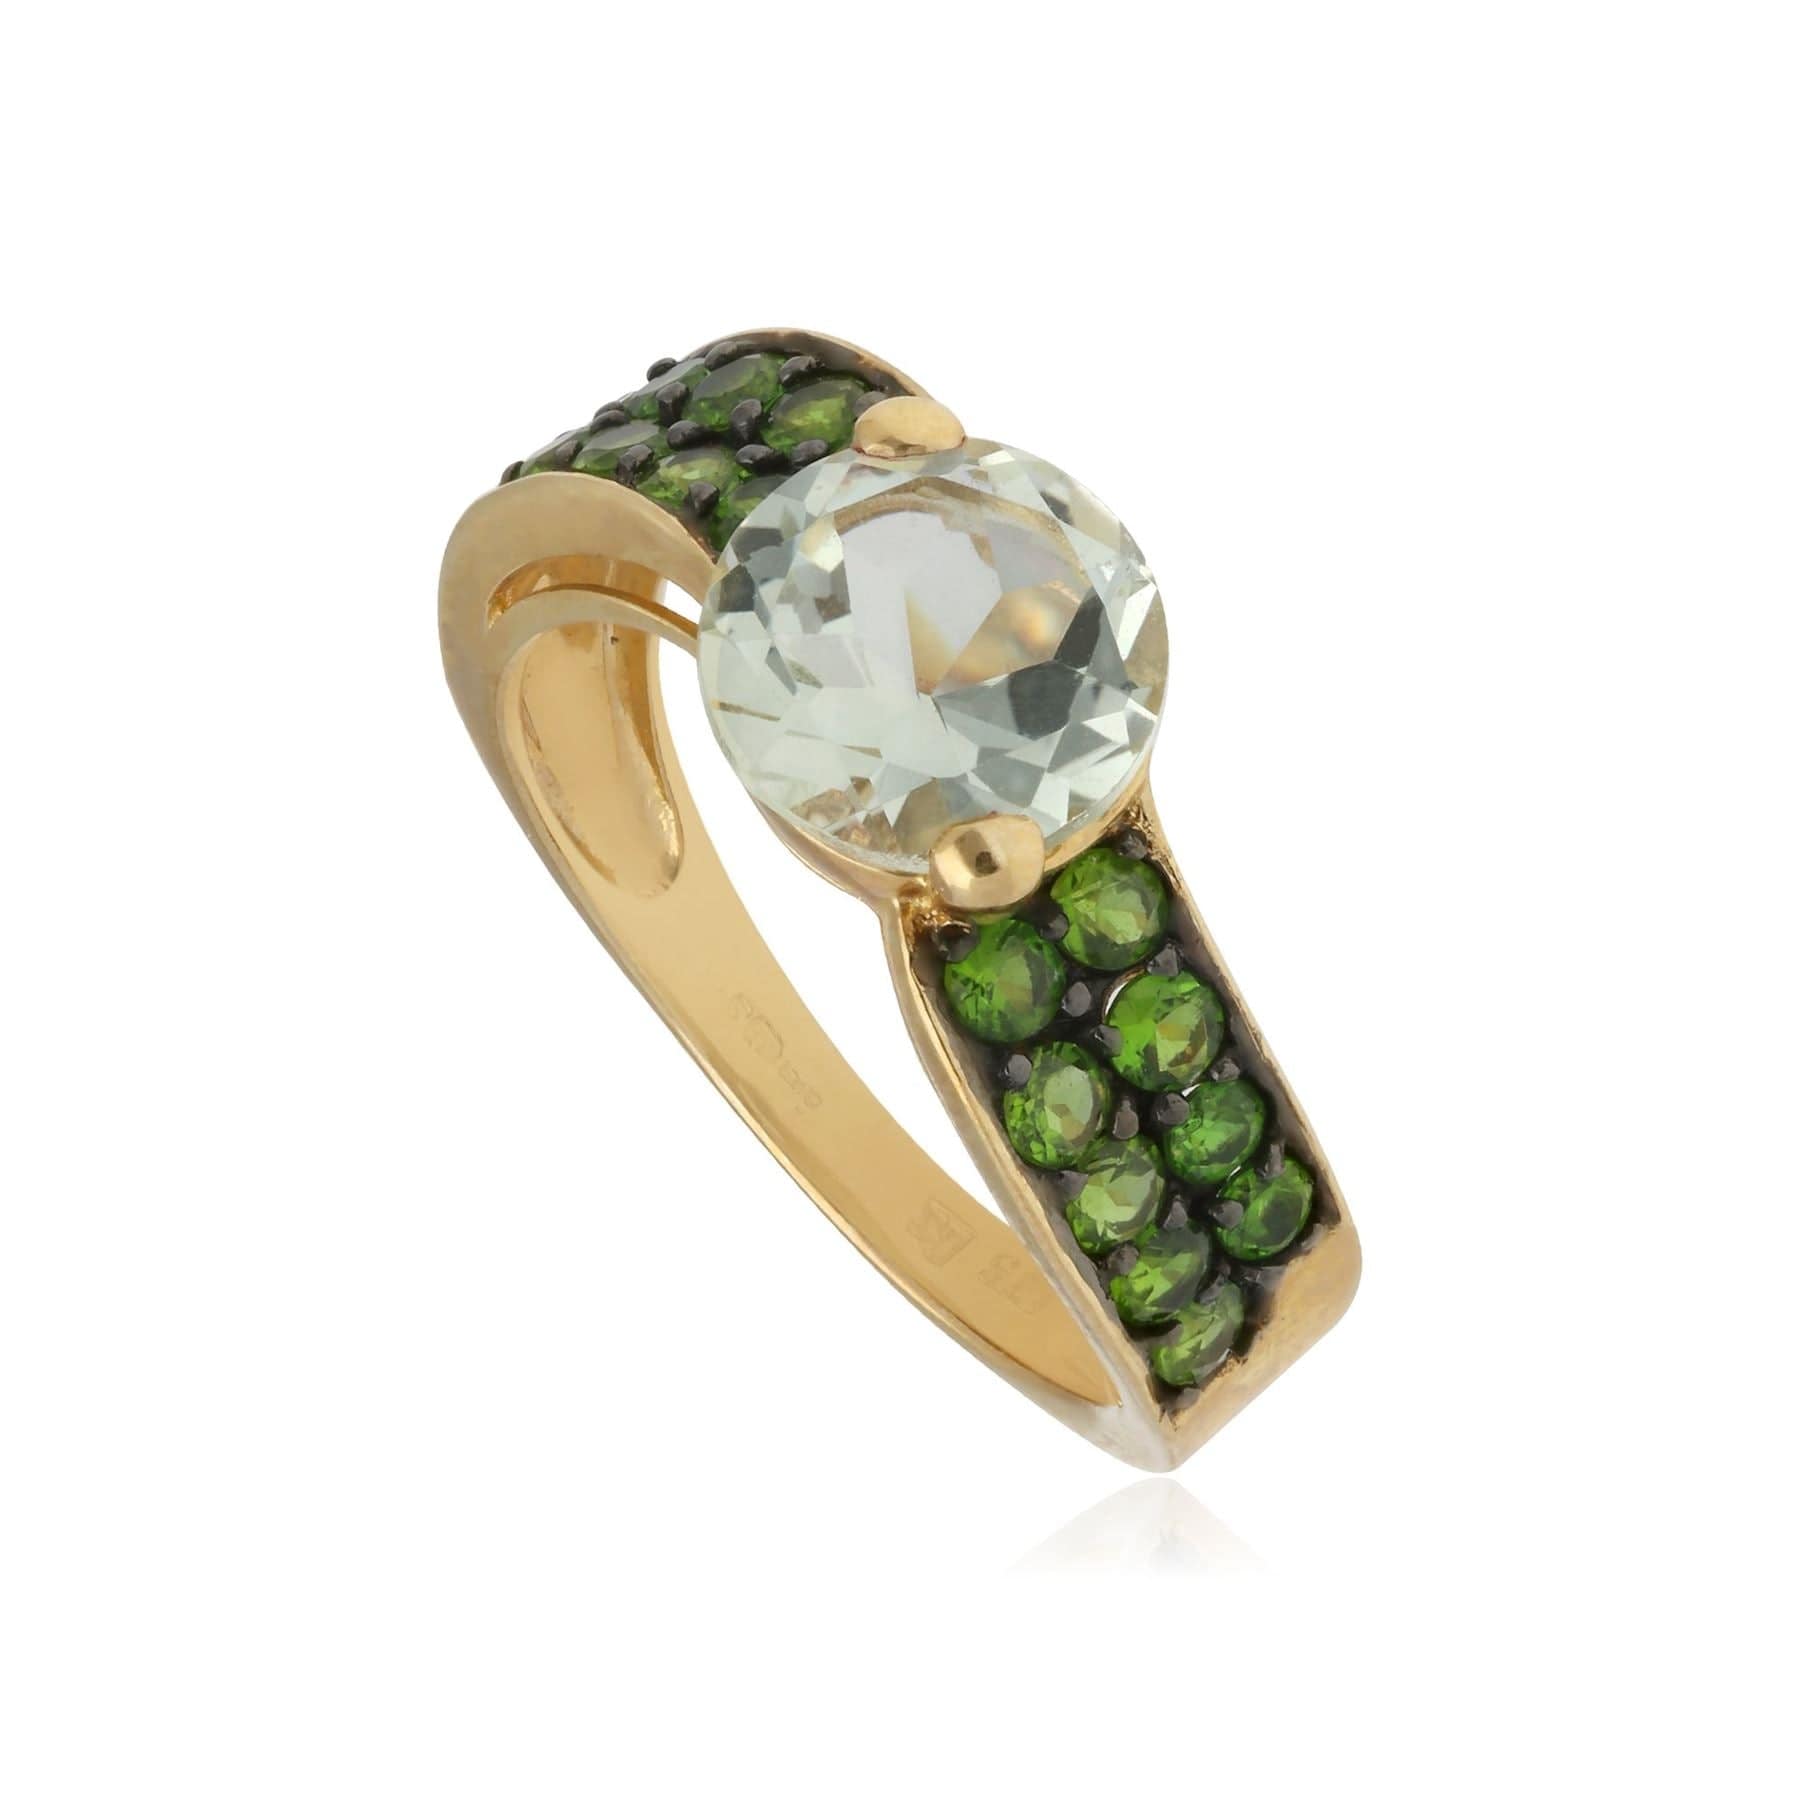 Kosmos Chrome Diopside & Moonstone Cocktail Ring in 9ct Yellow Gold - Gemondo